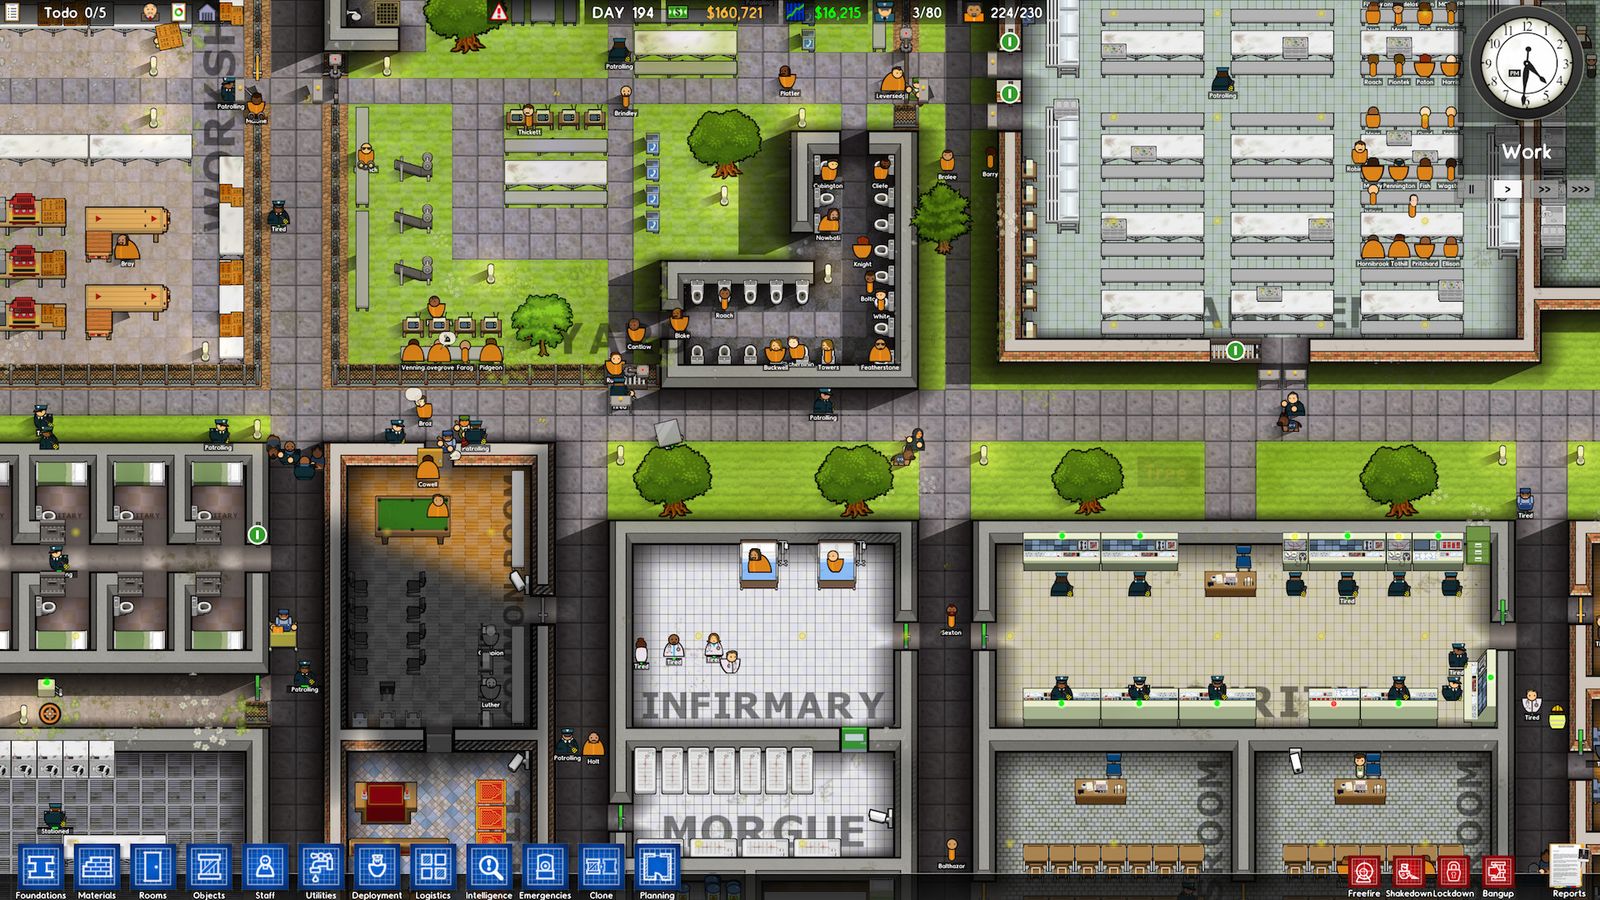 A prison for inmates, built by the player.